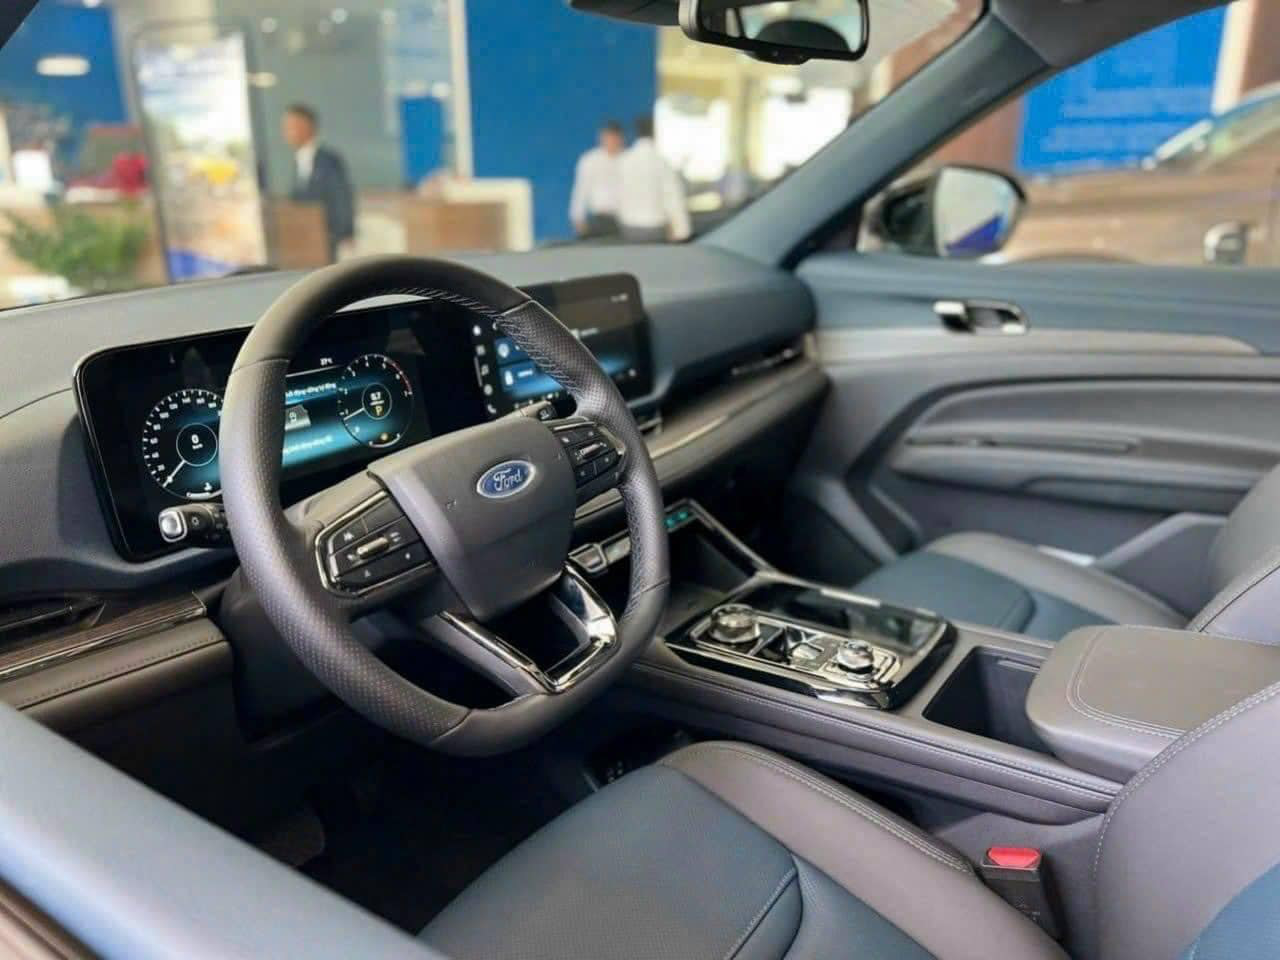 The Territory interiors have been designed in a luxurious style.  Some notable equipment like a pair of 12-inch screens, push-button start, 2-zone automatic air conditioning, gearshift knob, wireless charging, electronic brakes, automatic anti-glare mirrors and full sunroof view - Photo: Ford Dealer/Facebook